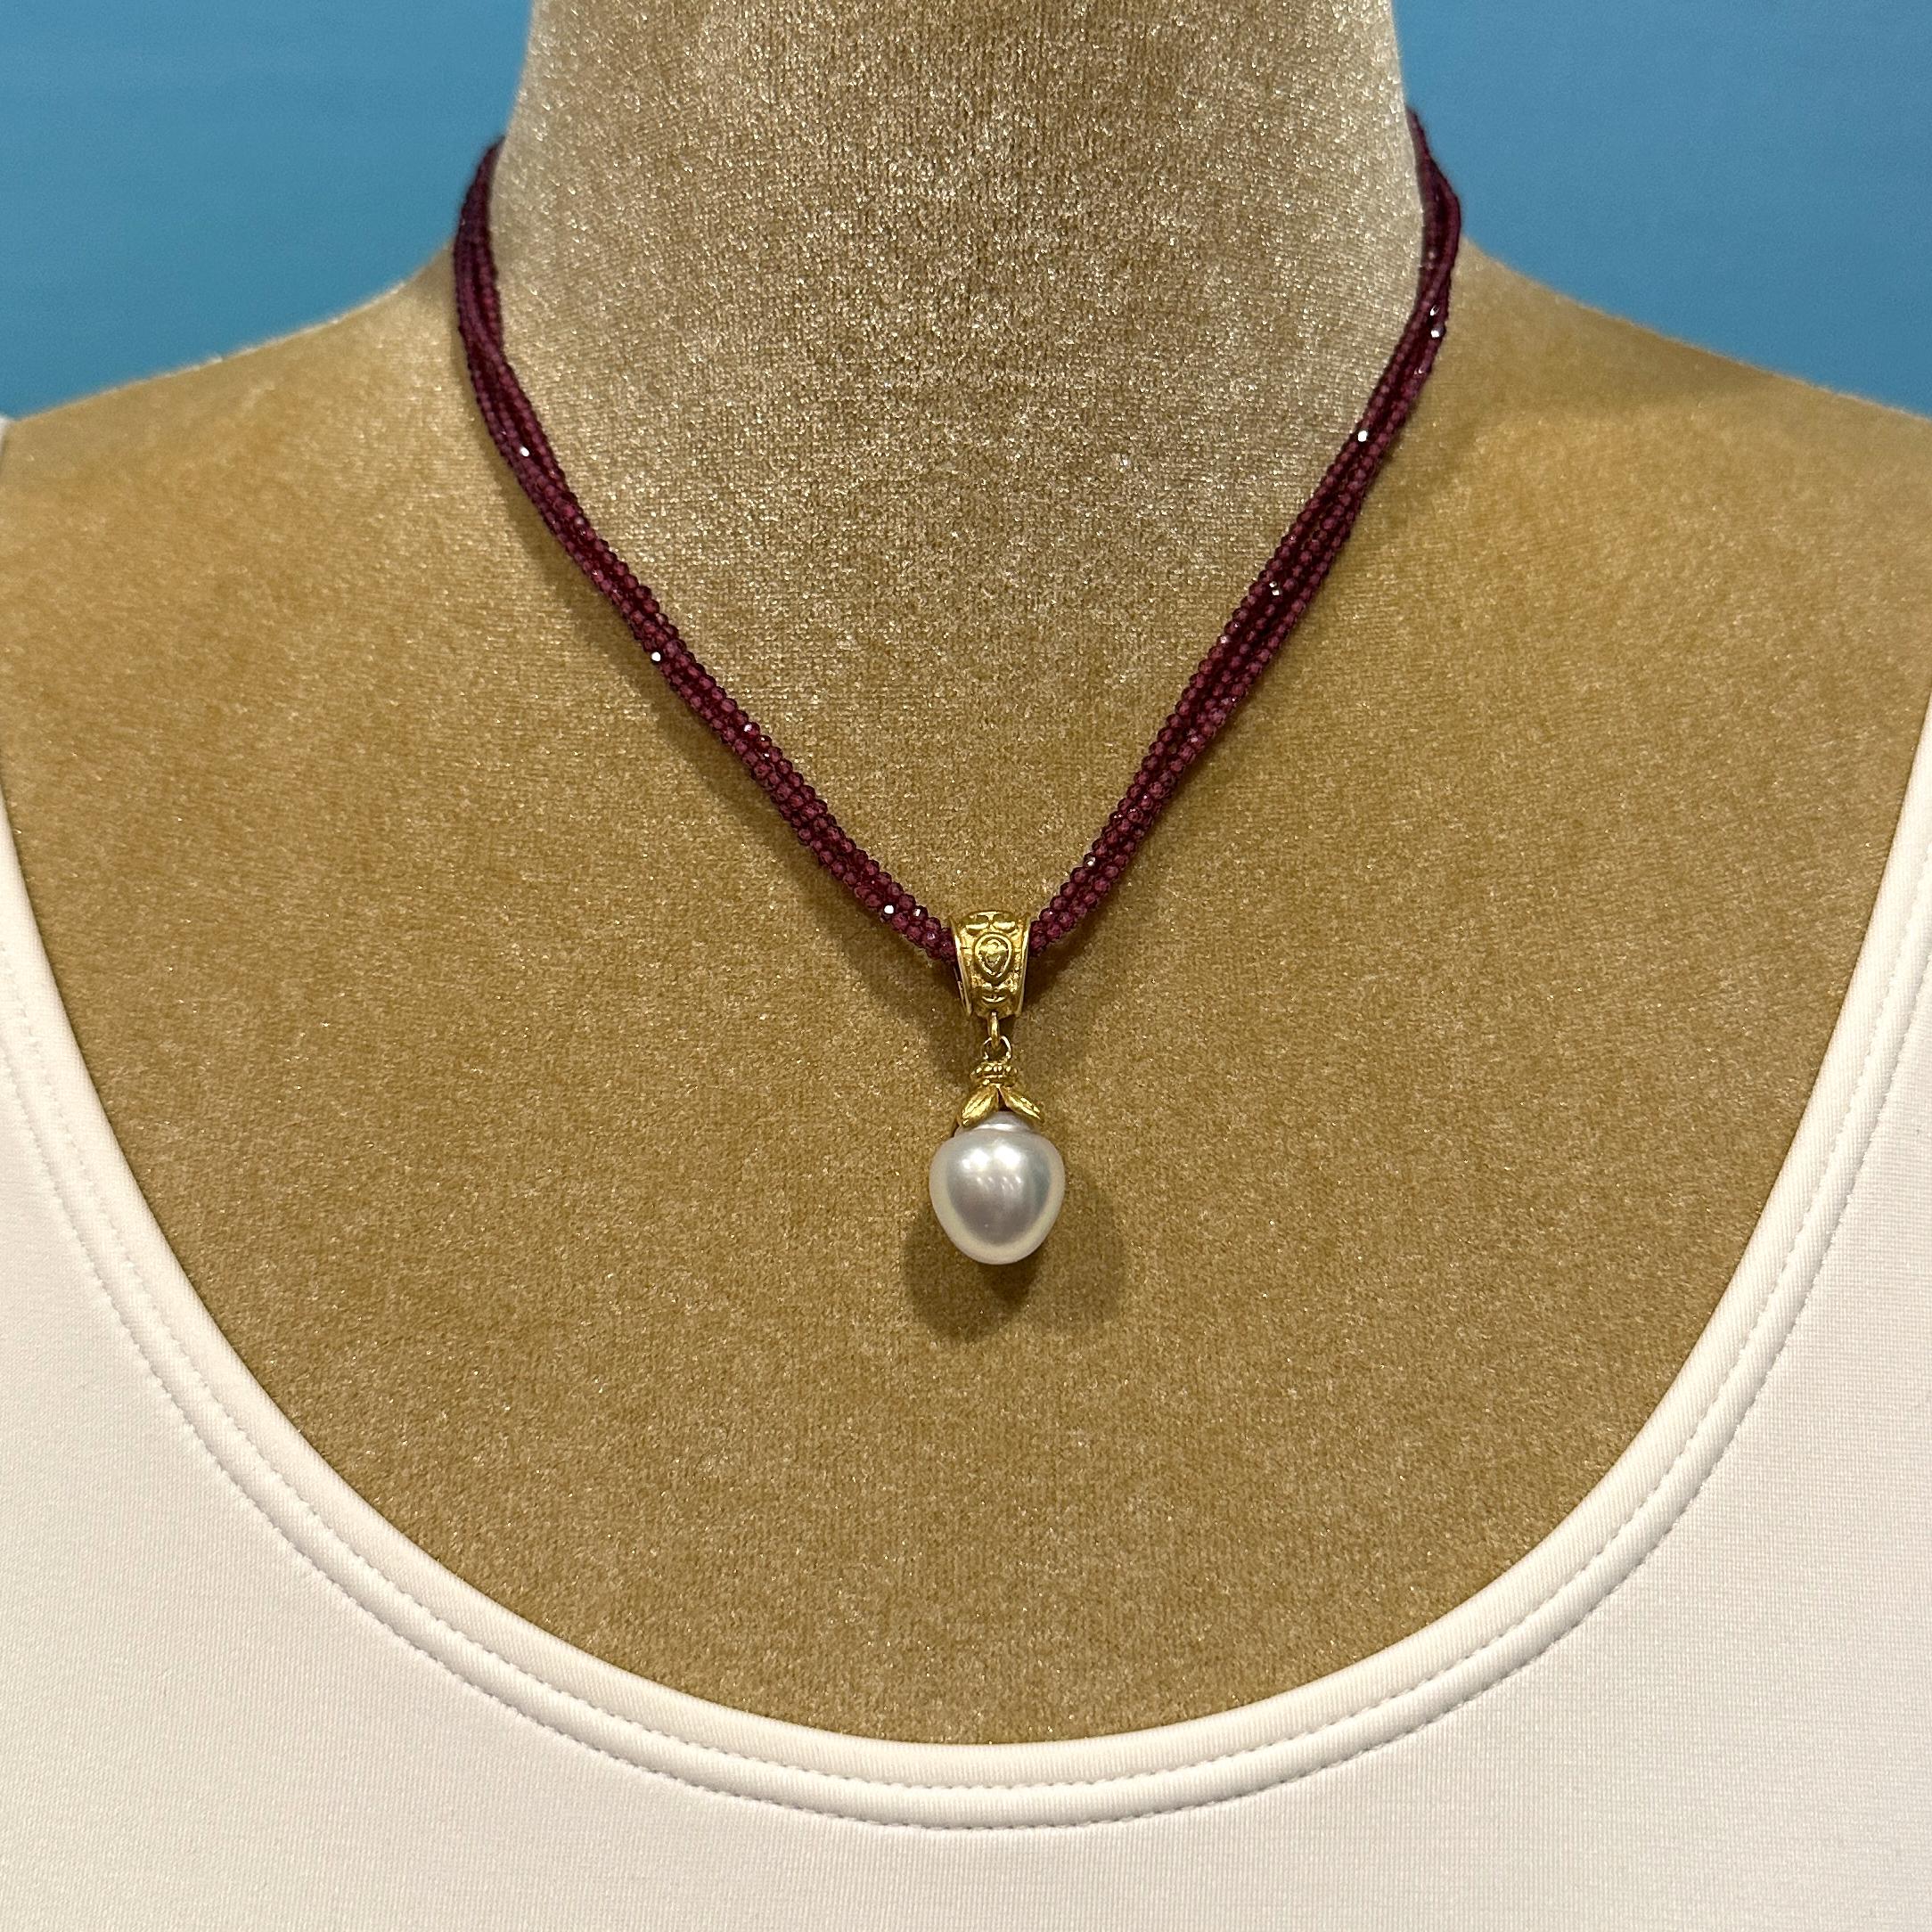 Baroque 13mm South Sea Pearl in 18K Gold Fob Pendant with Rhodolite Necklace For Sale 2